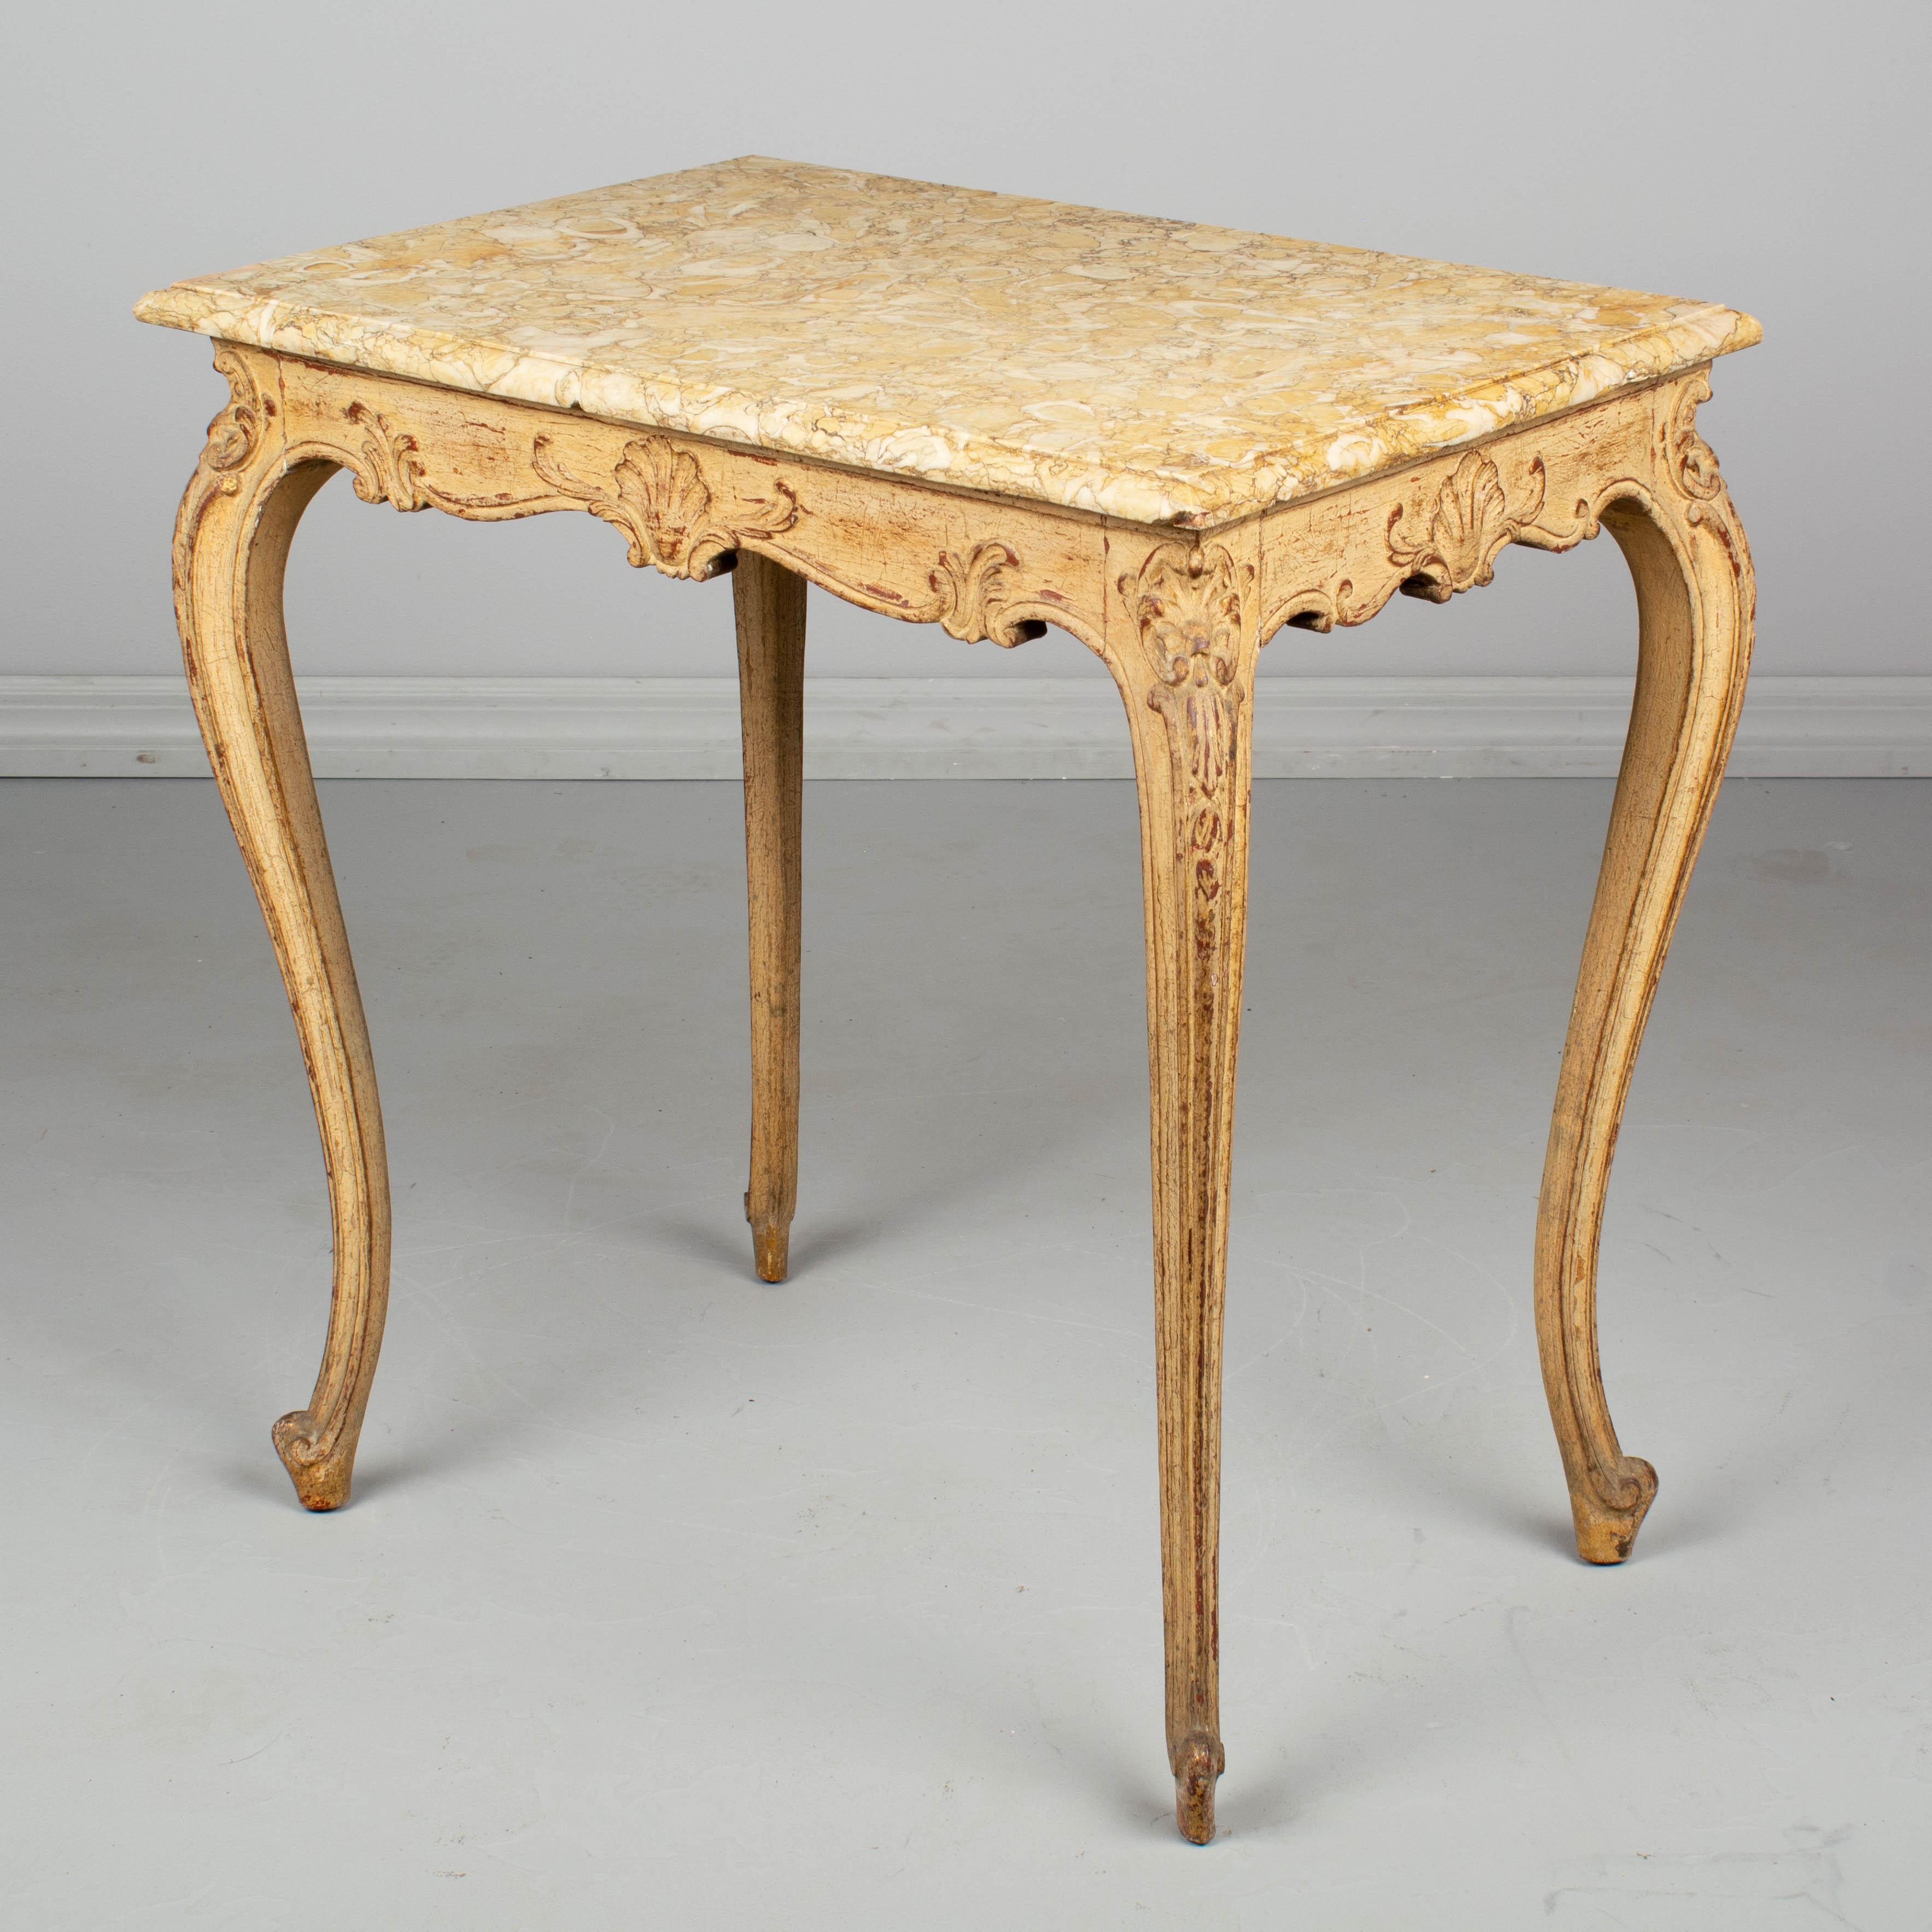 A French Louis XV style side table with painted patina and original marble top. Small chip to corner of marble and a small repair. Circa 1920-1930.  27.5”H x 18.75”D x 26.5”H
Contact us for a competitive shipping quotation. Please refer to photos